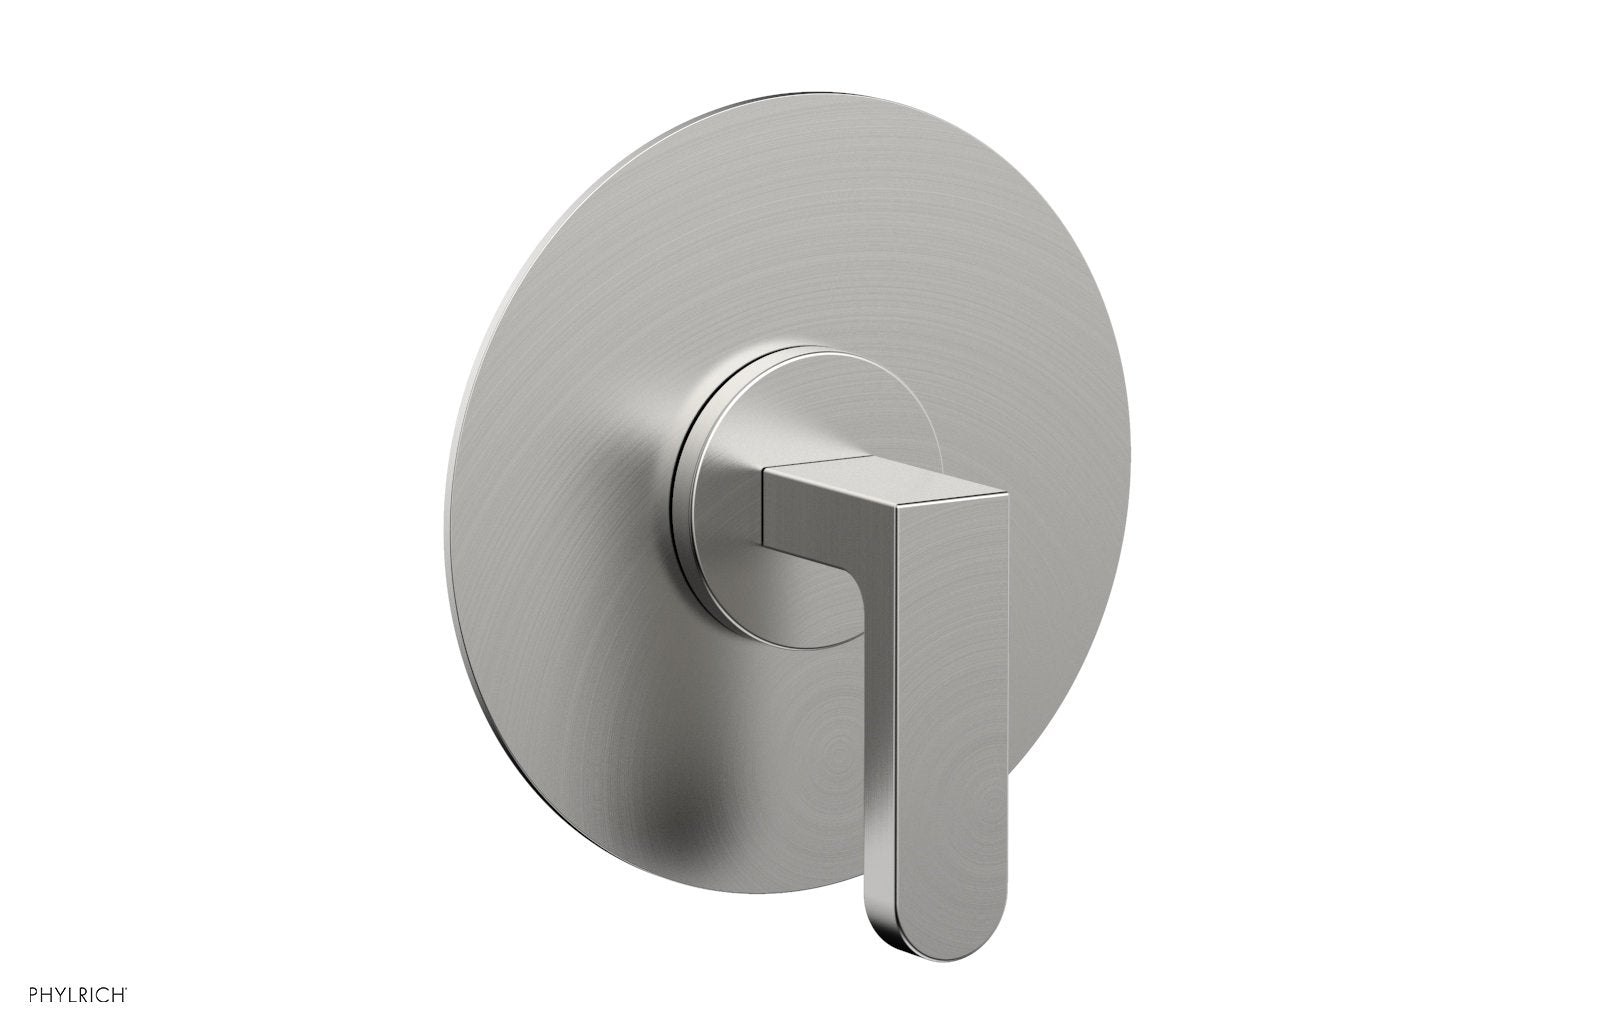 Phylrich ROND Thermostatic or Pressue Balance Shower Trim, Lever Handle